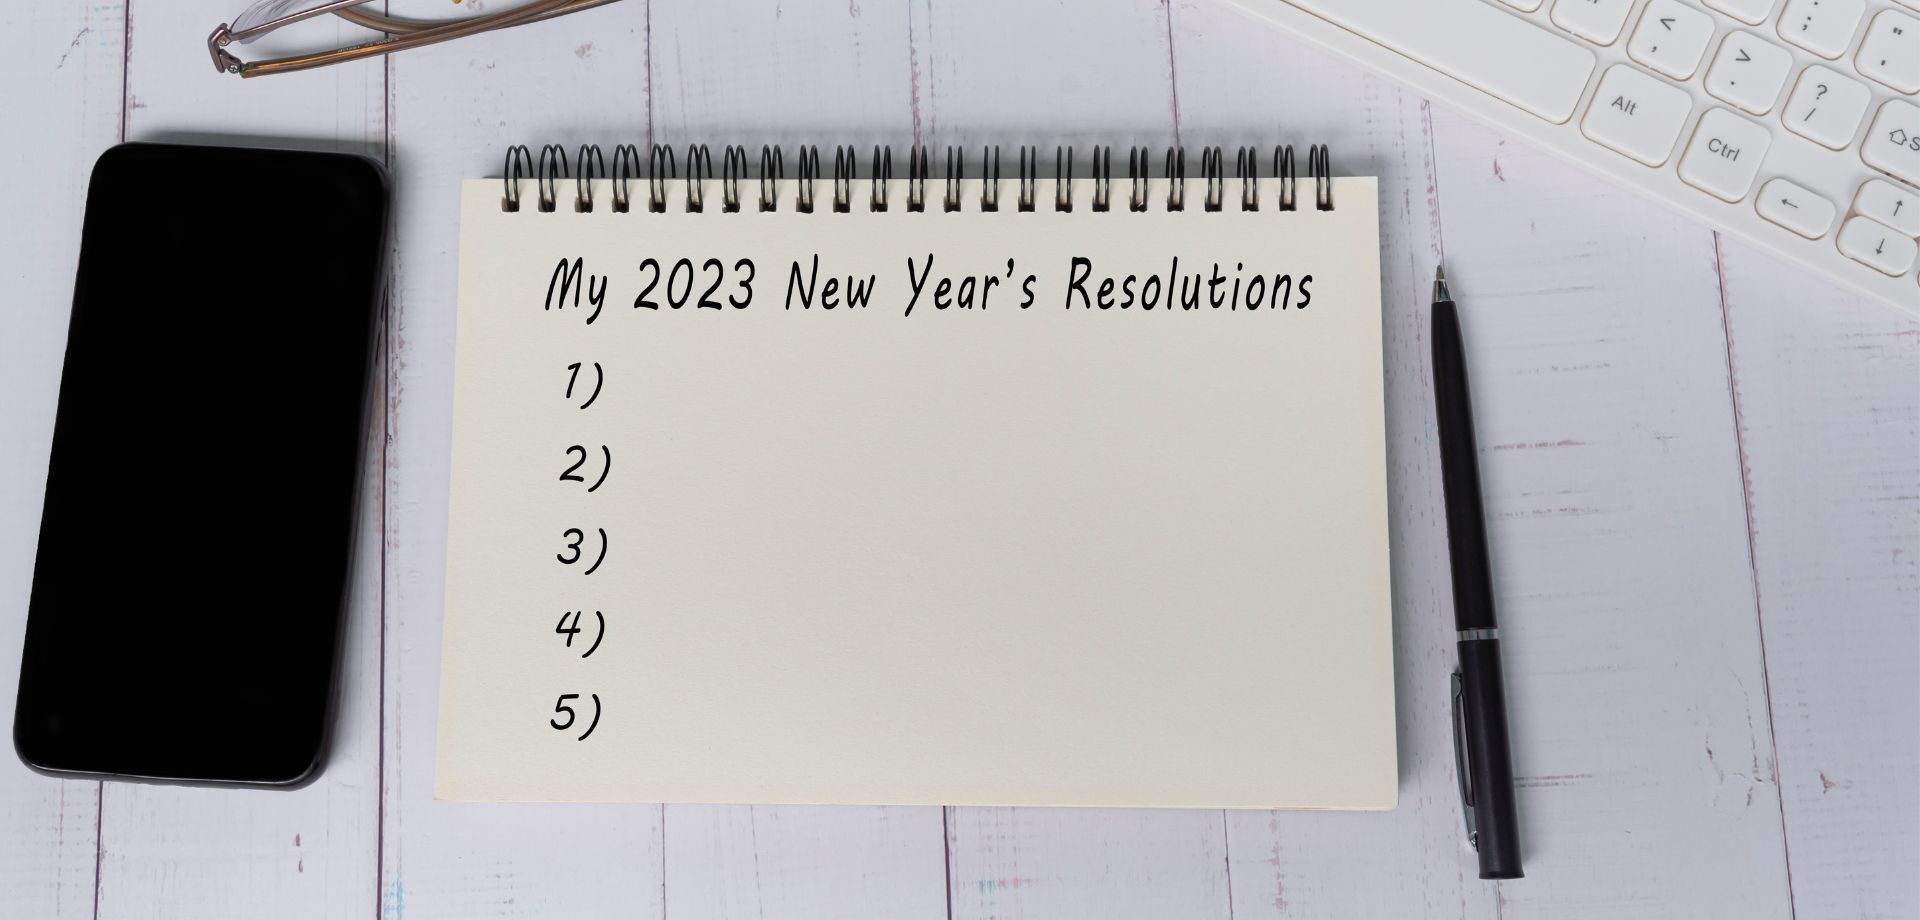 New Years resolutions list